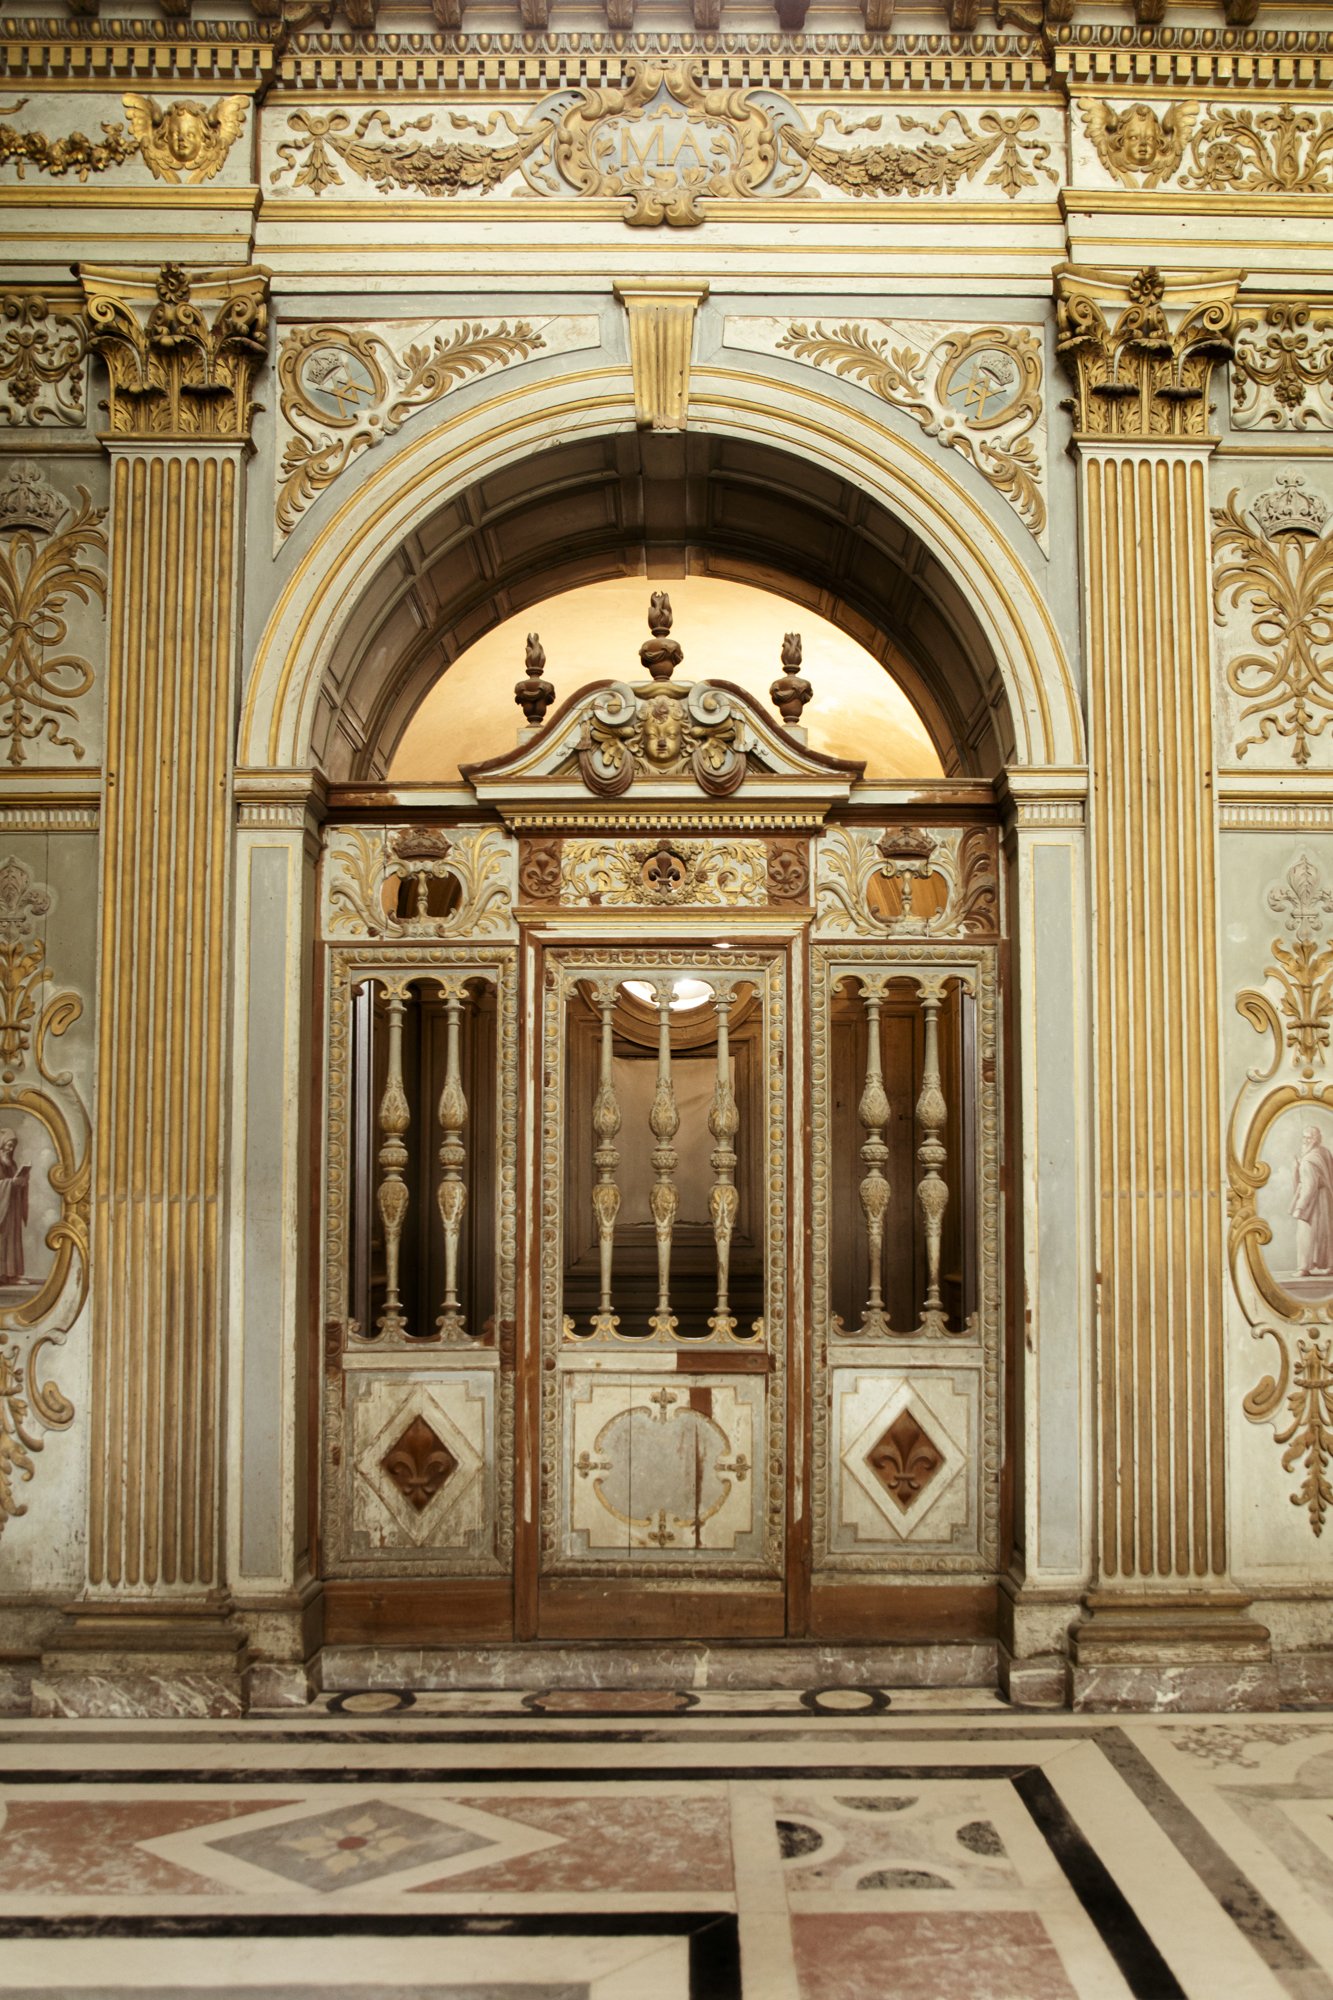 The Royal Chapel of the Trinity at Chateau de Fontainebleau